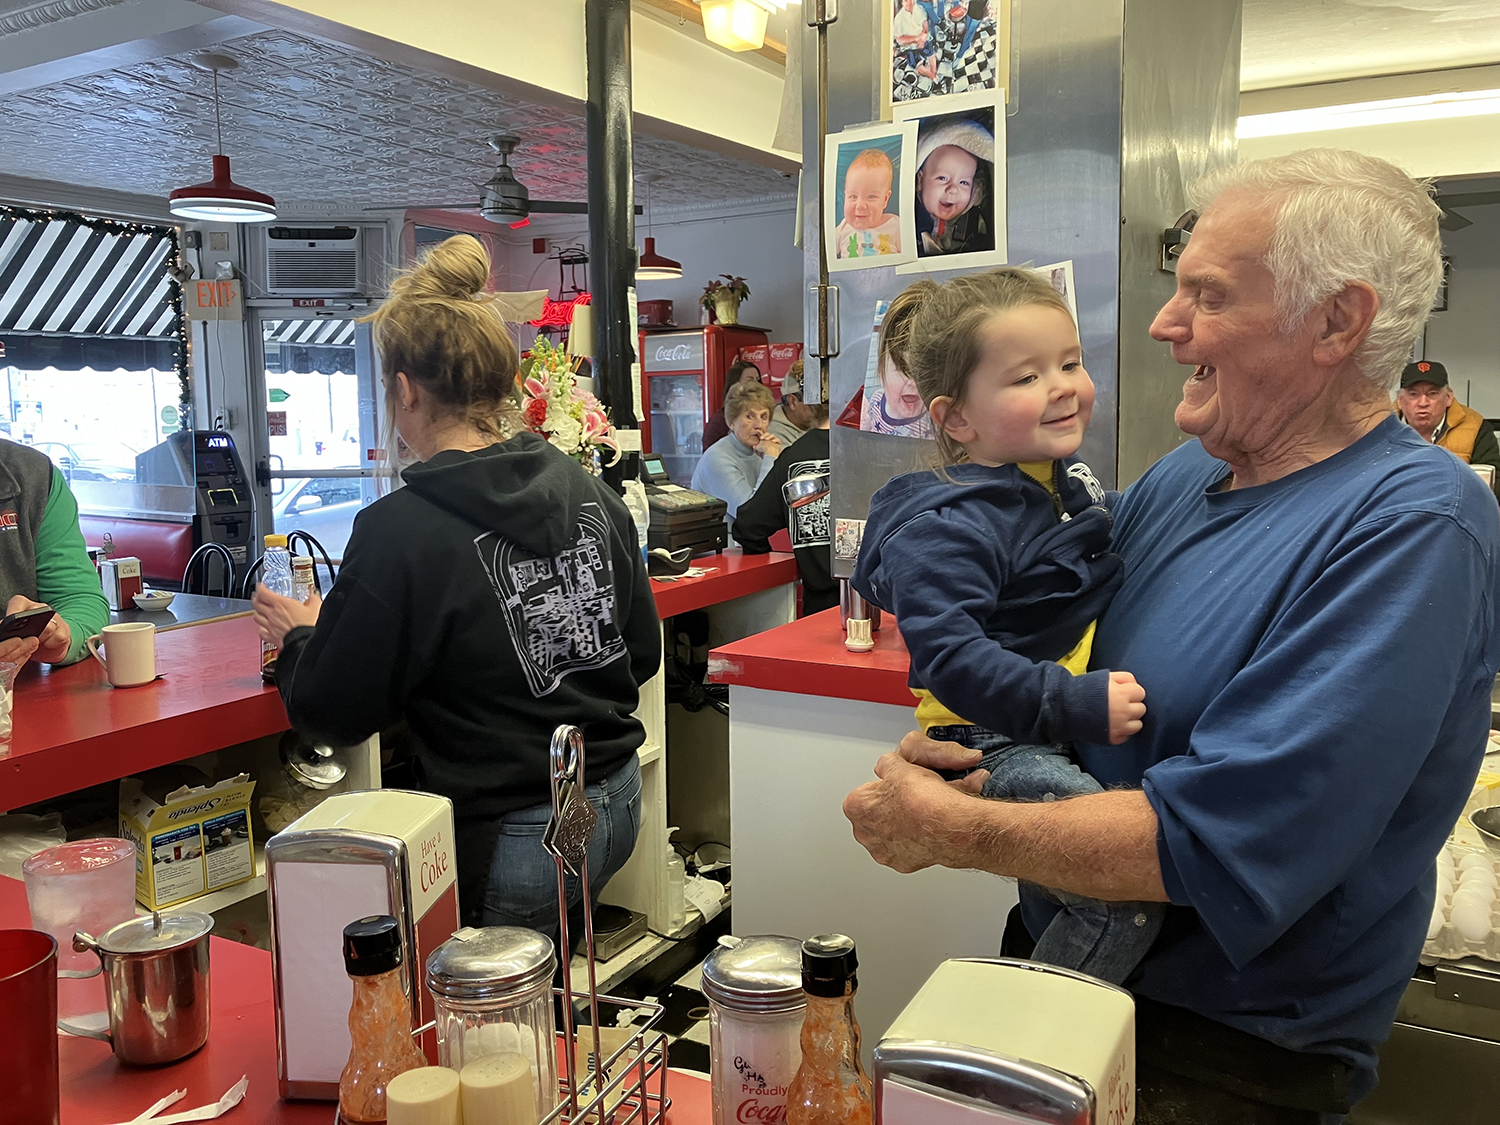 Gary Hooks, right, hugs his great granddaughter, Avery, behind the counter at Gary's Handy Lunch on its last day of service on Sunday, Feb. 12, 2023. Family and friends gathered at the beloved diner to mark the end of more than 55 years of service.